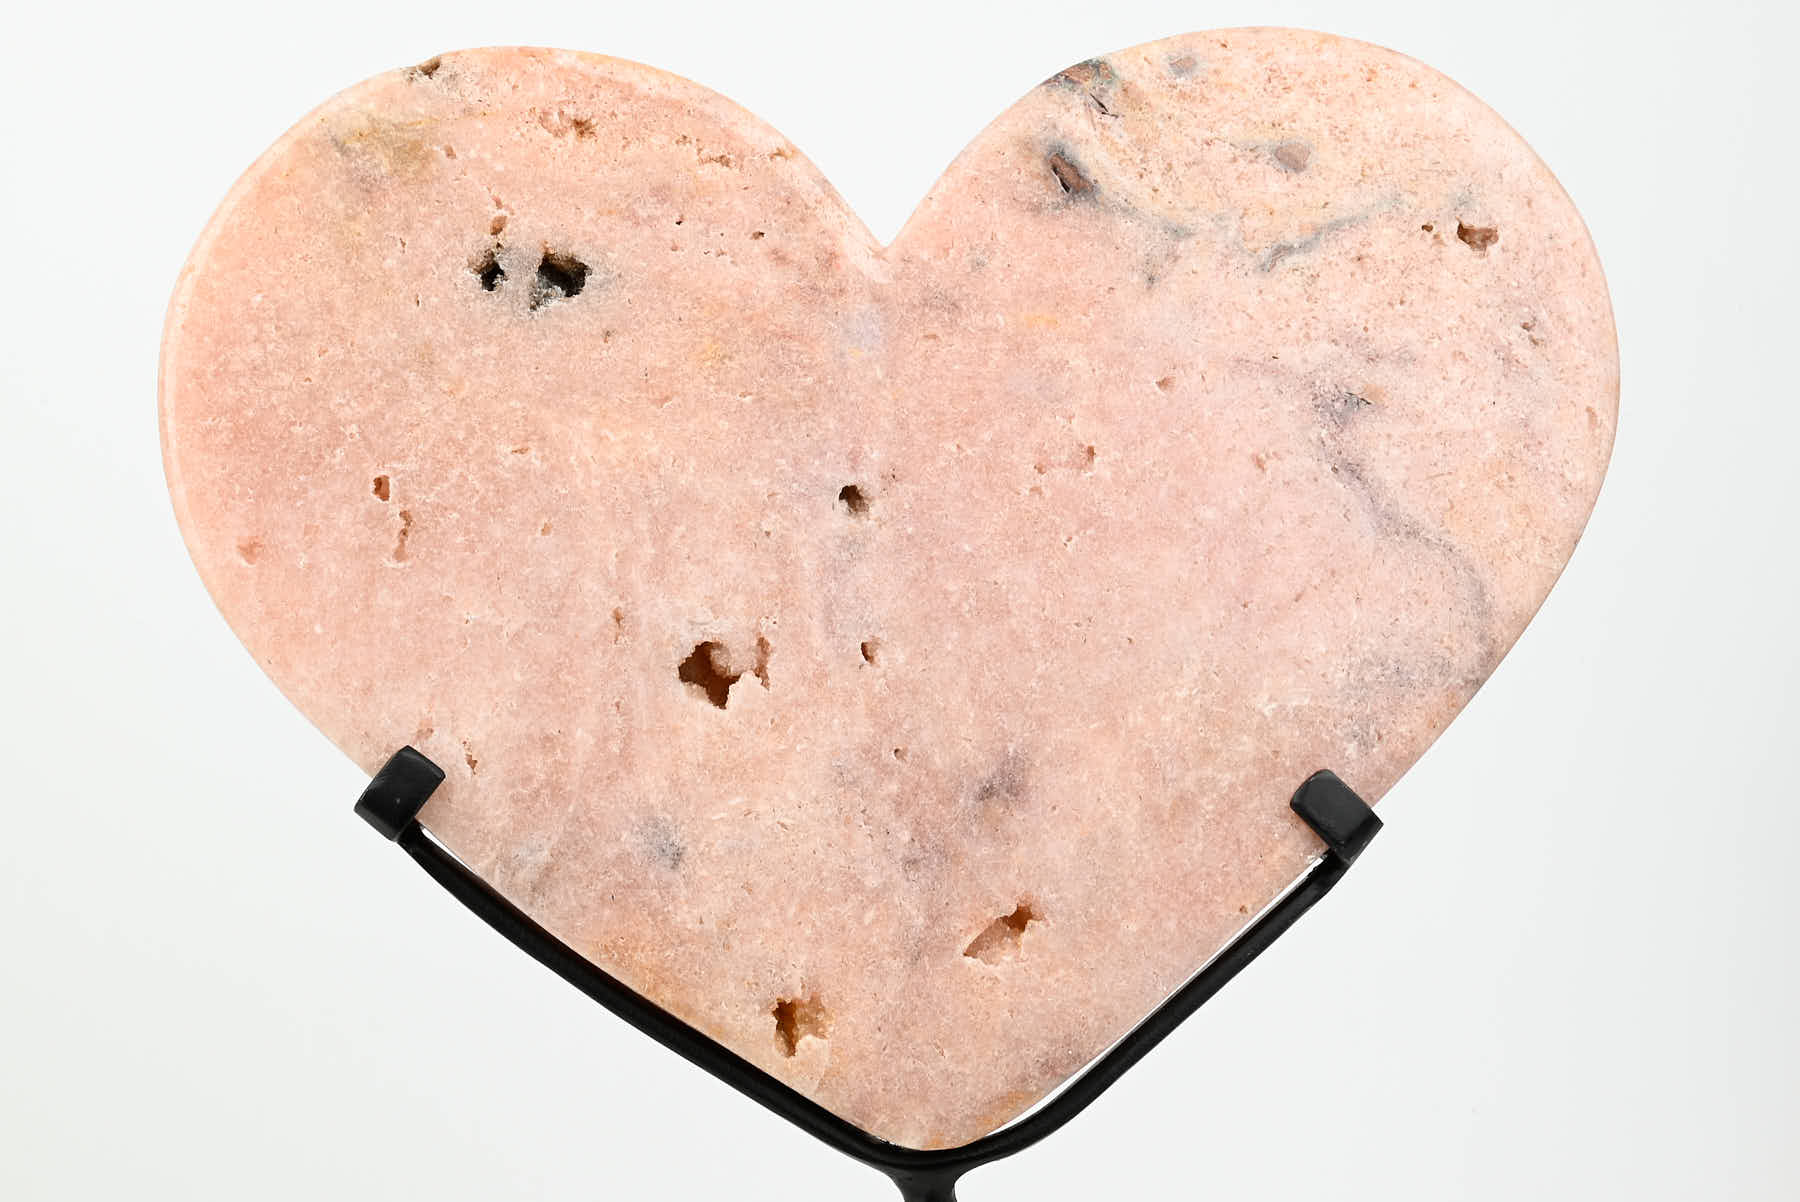 Extra Quality Pink Amethyst Heart - 2.81kg, 27cm high - #HTPINK-34022